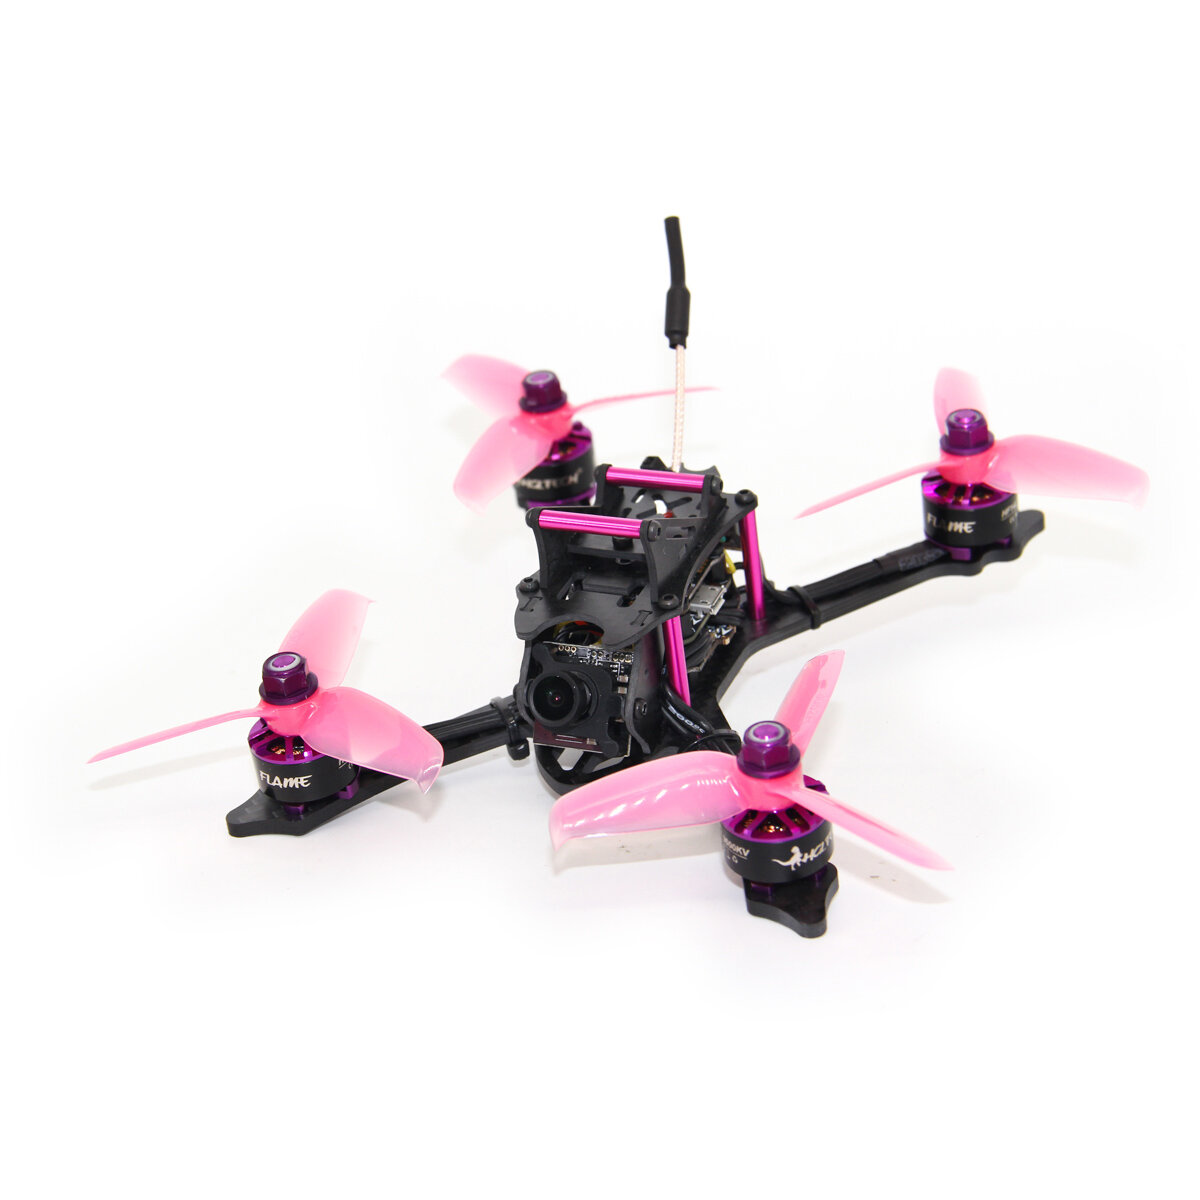 best price,hglrc,xjb,145mm,fpv,drone,pnp,discount